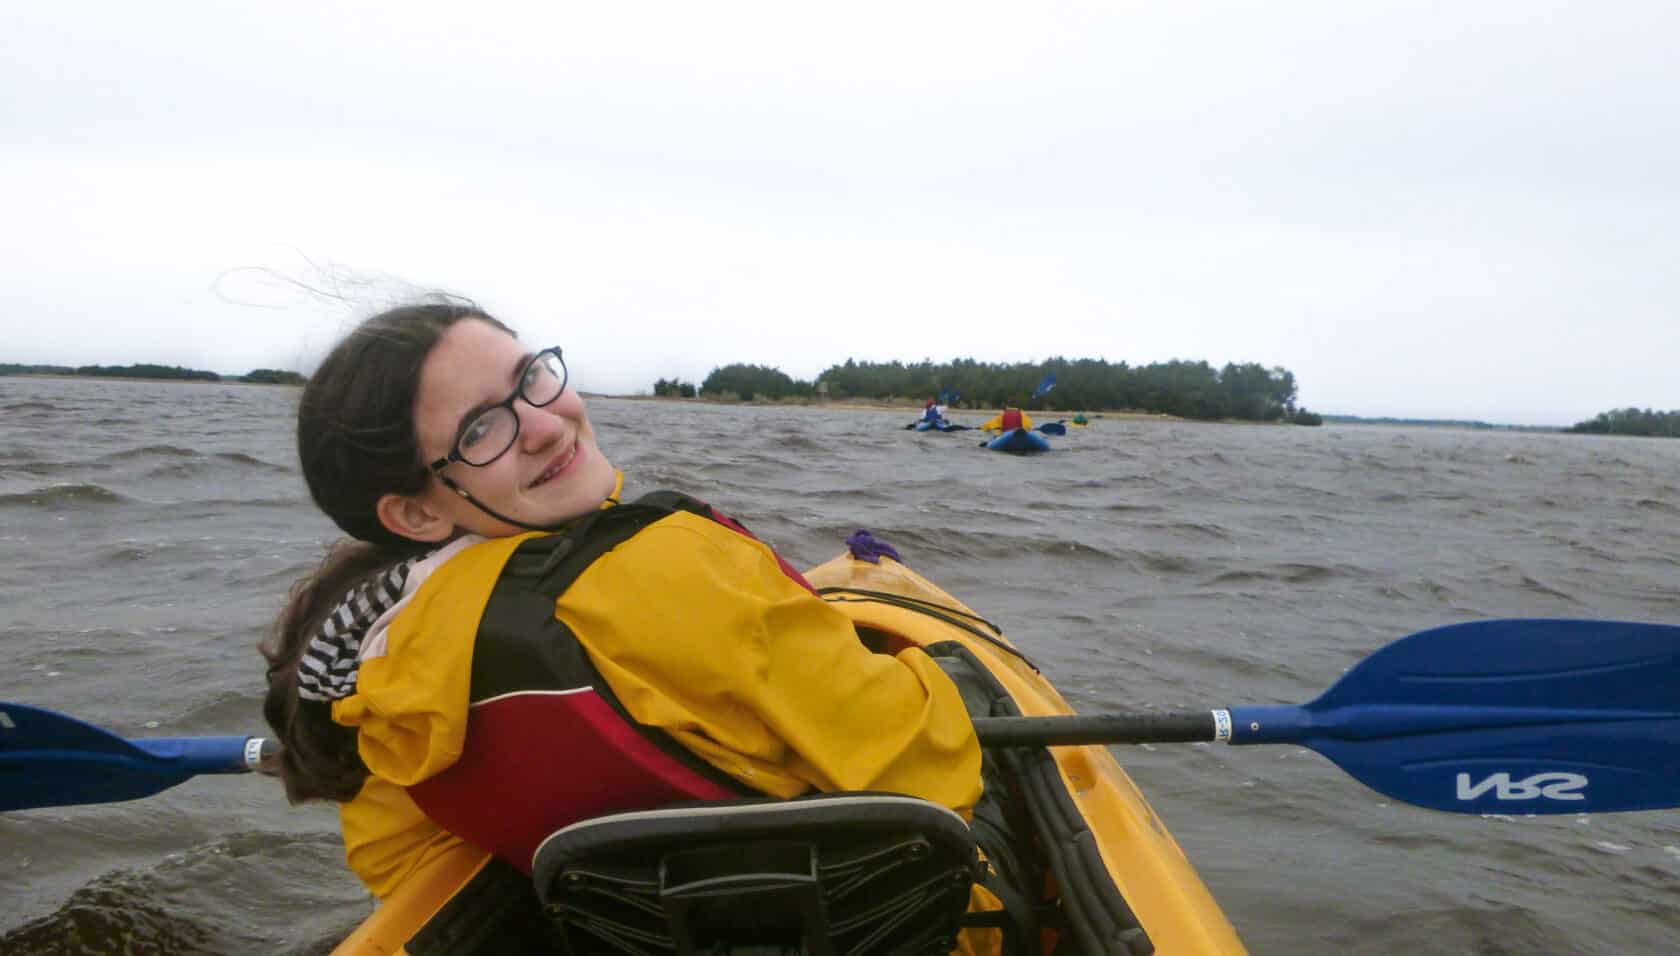 A girl on a kayaking looking back and smiling.